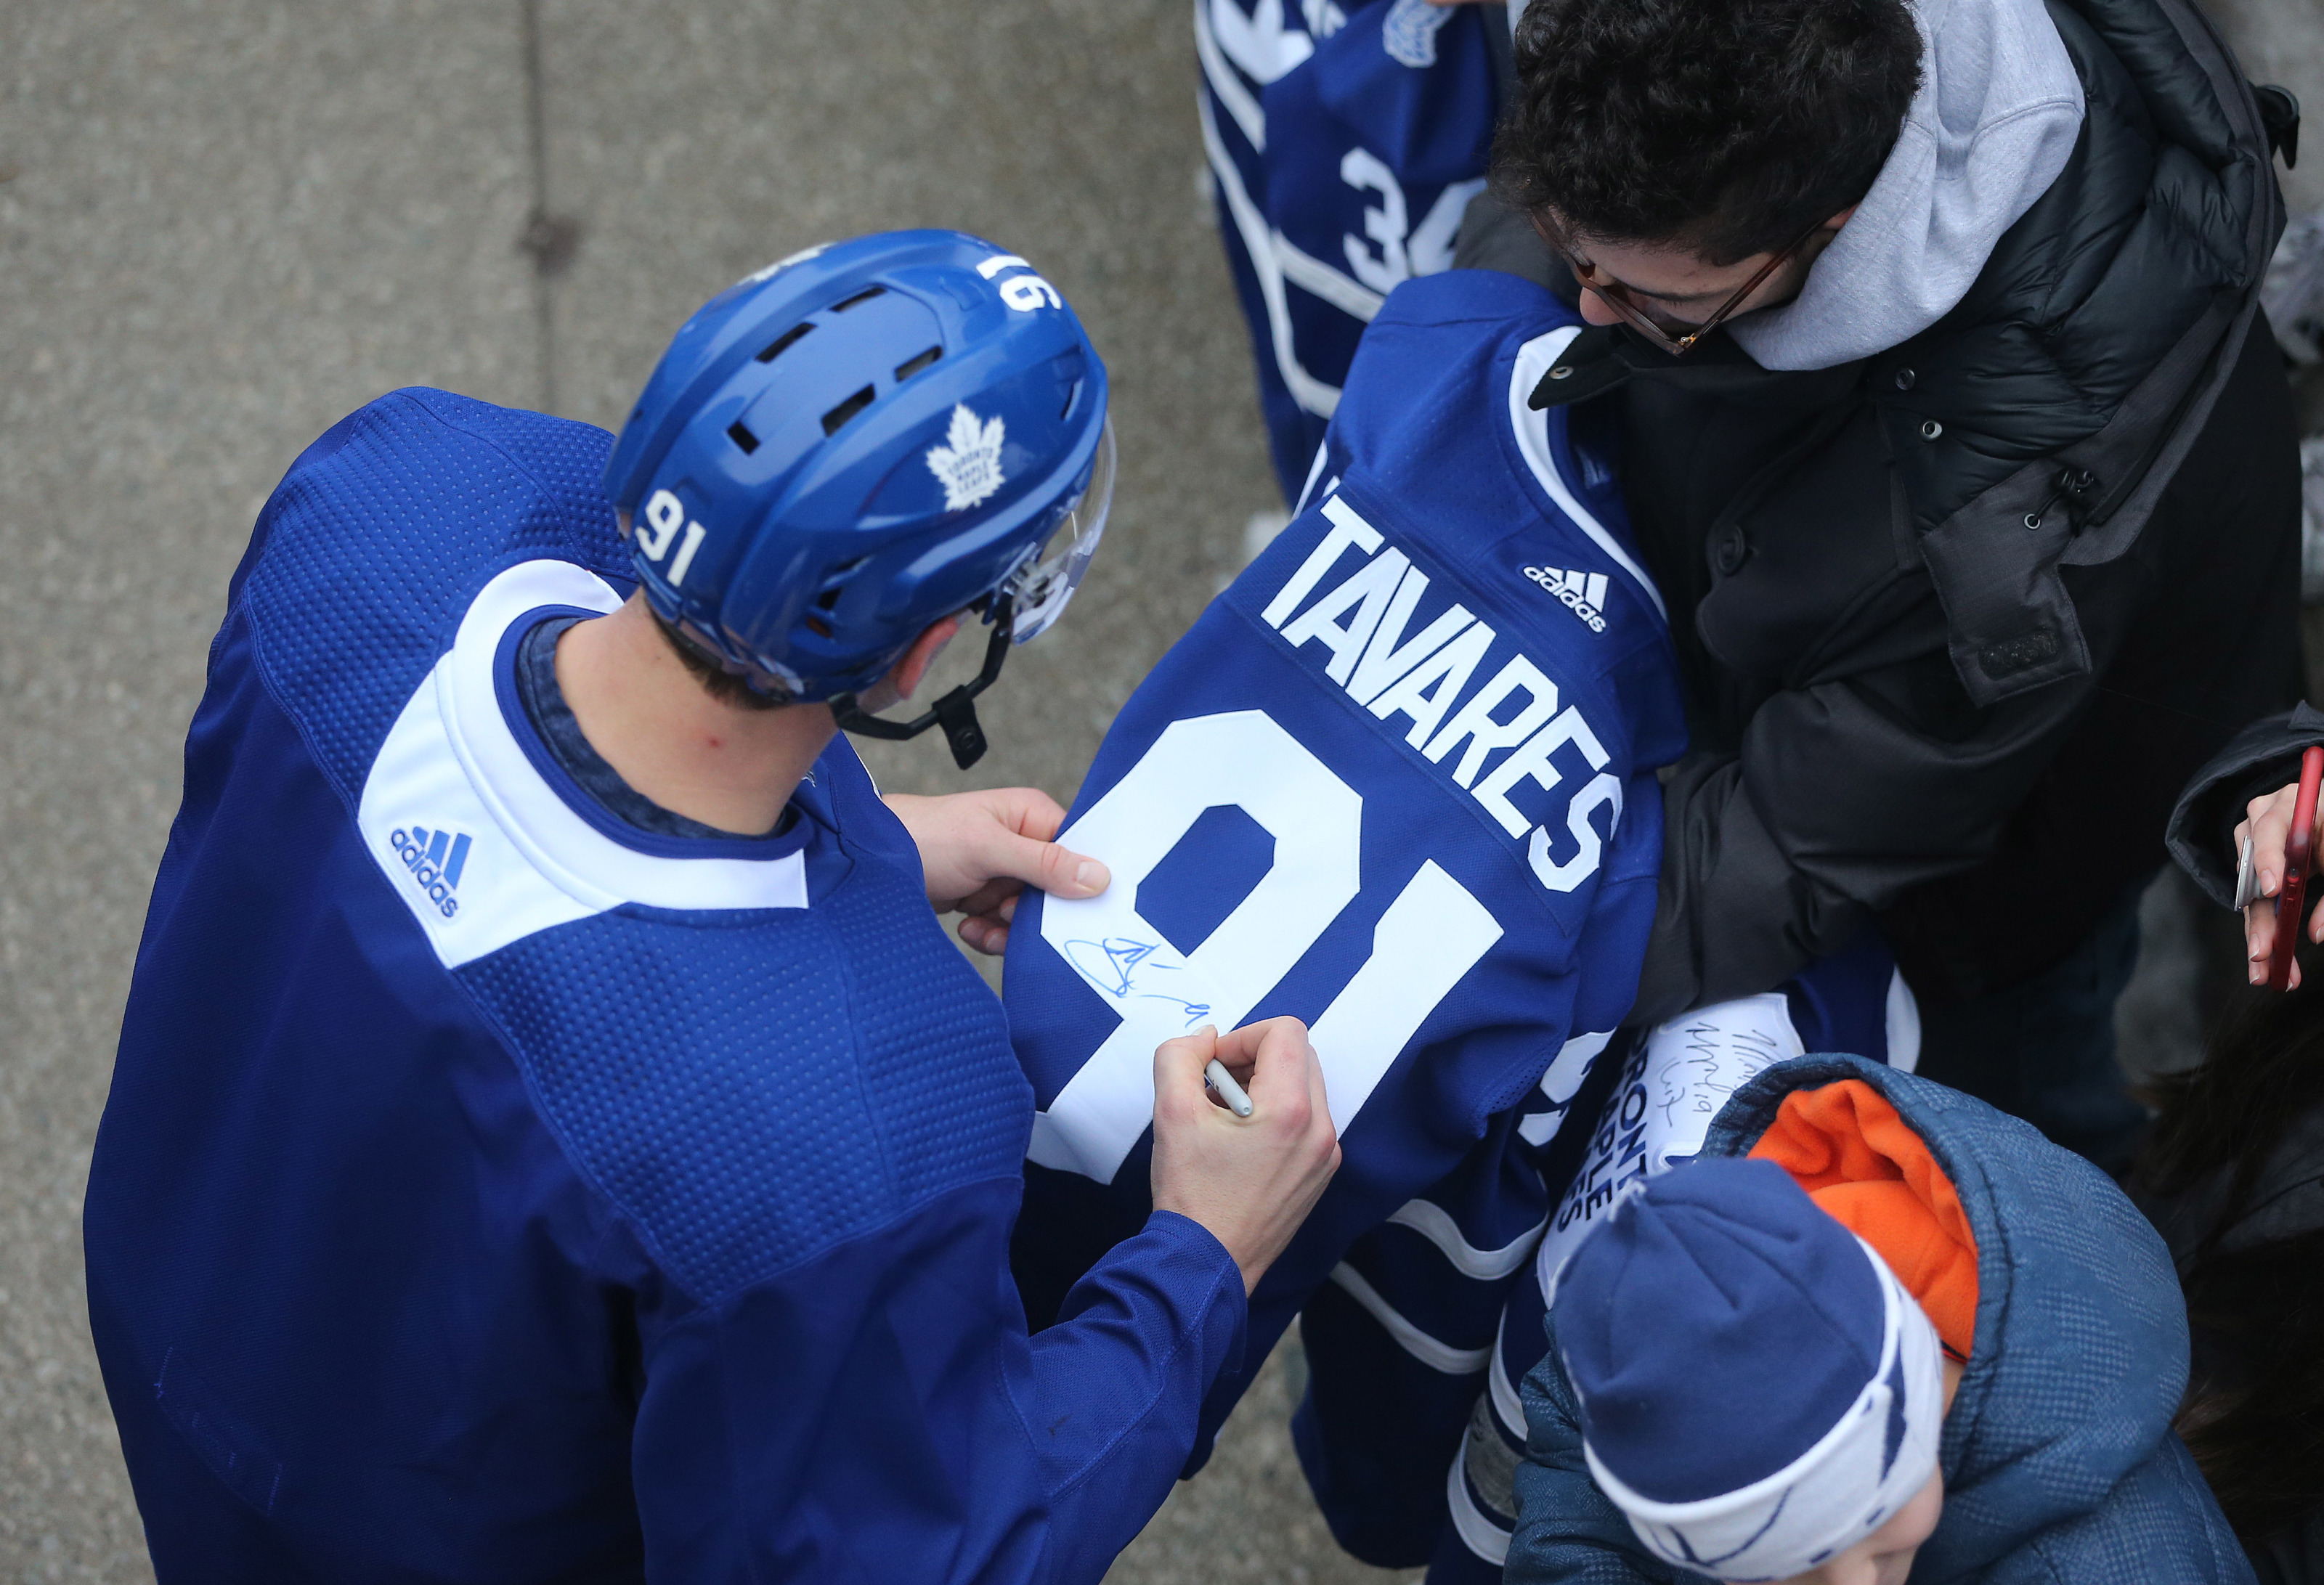 The jersey of John Tavares of the Toronto Maple Leafs, hangs in the News  Photo - Getty Images